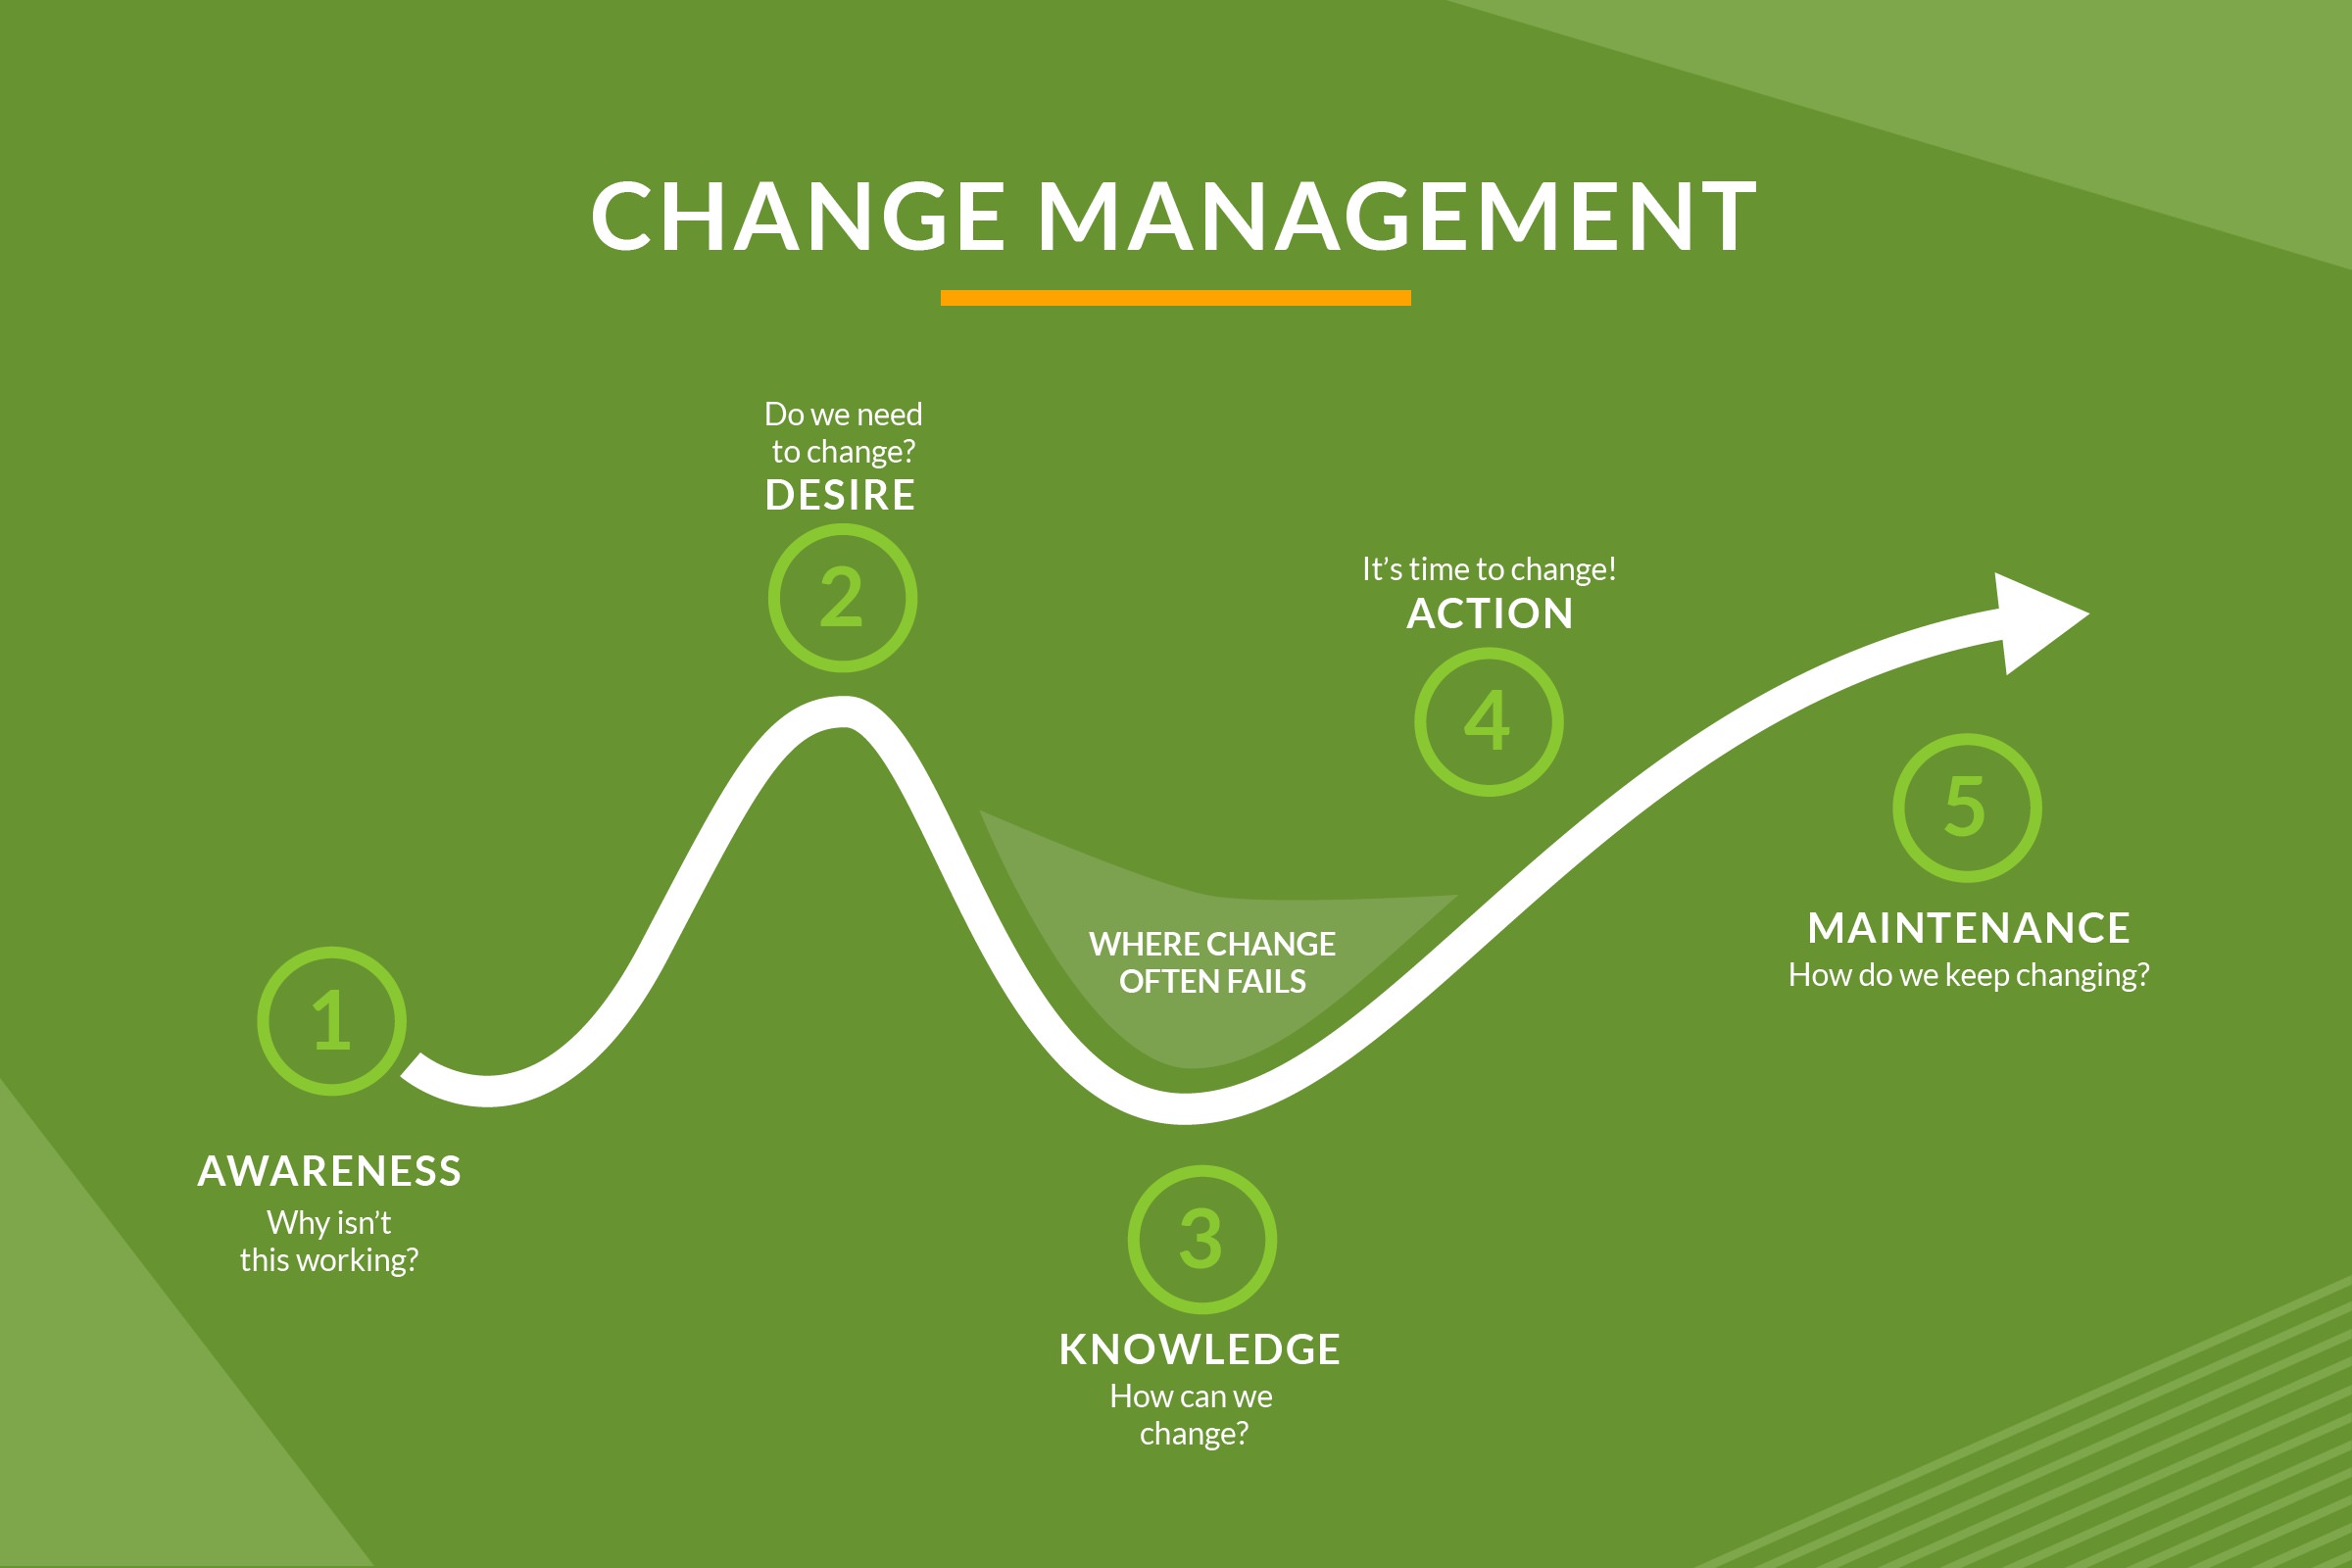 Change Management. A path is showing leading through five points, peaking at the second and fifth and lowest at the third. the first point is Awareness (why isn't this working?). The second is Desire (do we need to change?). The third is Knowledge (how can we change?). The fourth is Action (it's time to change!). The fifth and last is Maintenance (How do we keep changing?). An area between the second, third, and fourth is marked "Where change often fails".